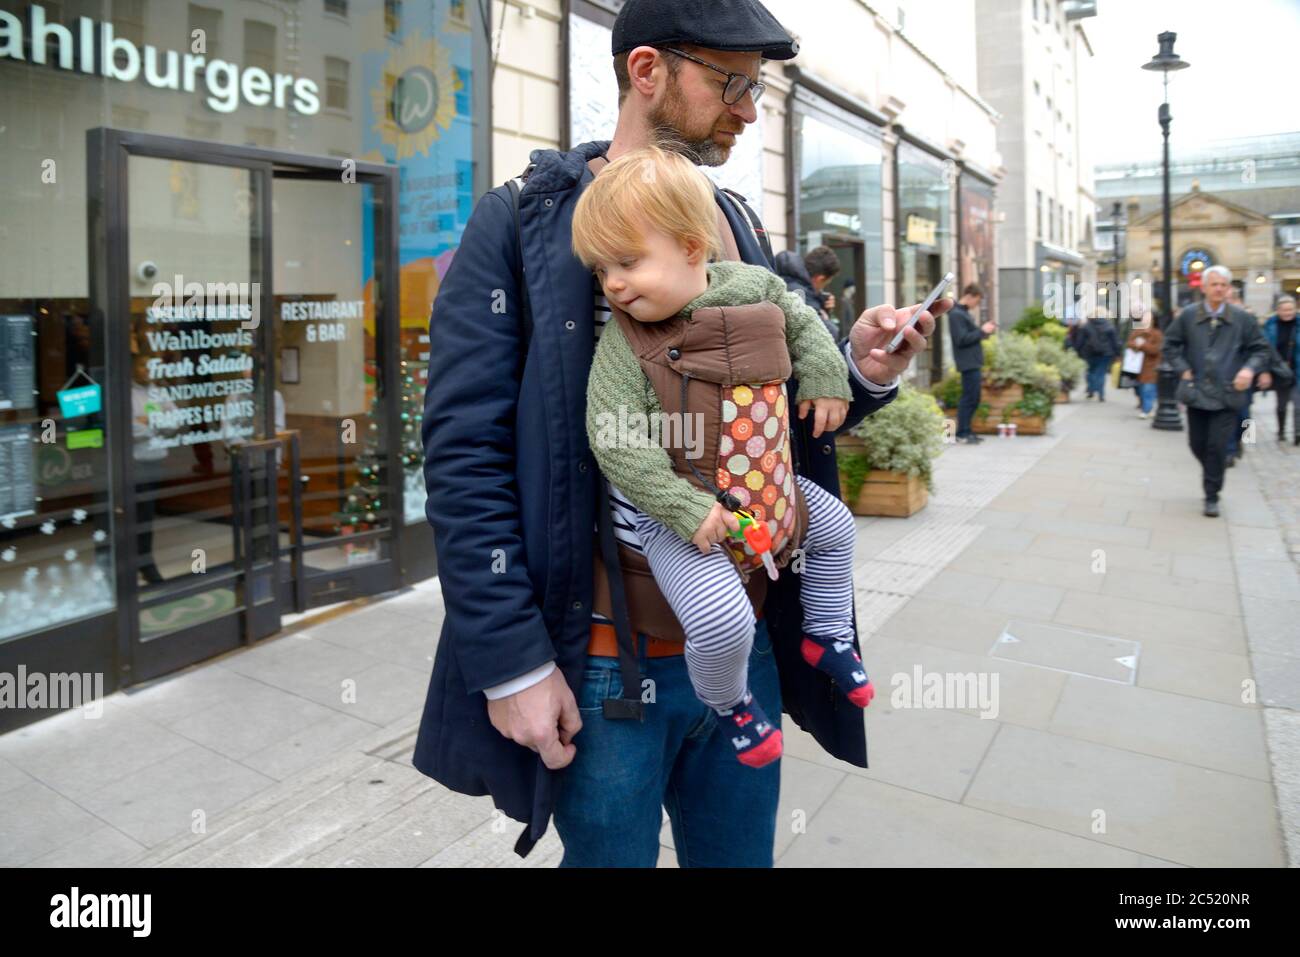 London, England, UK. Father carrying his child in a papoose baby carrier Stock Photo